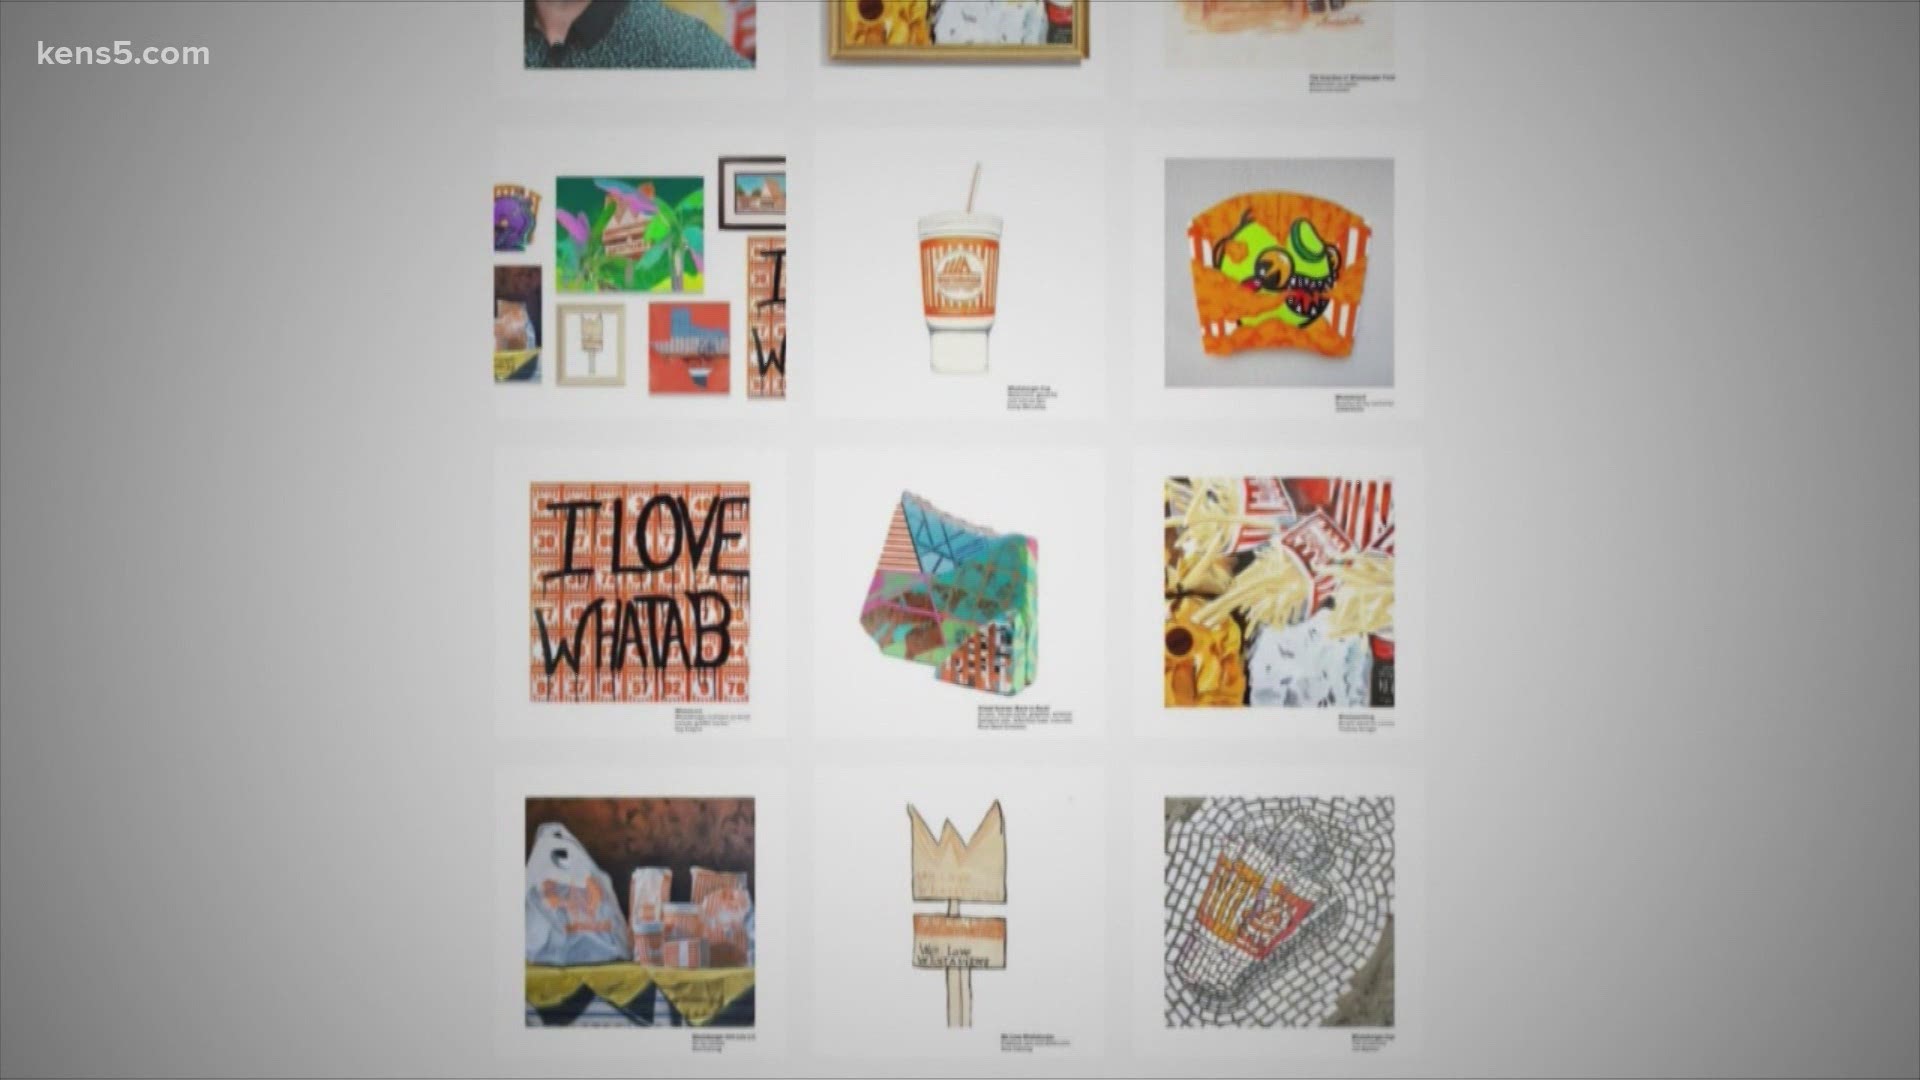 The Whataburger Museum of Art is an Instagram page featuring artwork created by fans of the quintessential Texas brand.